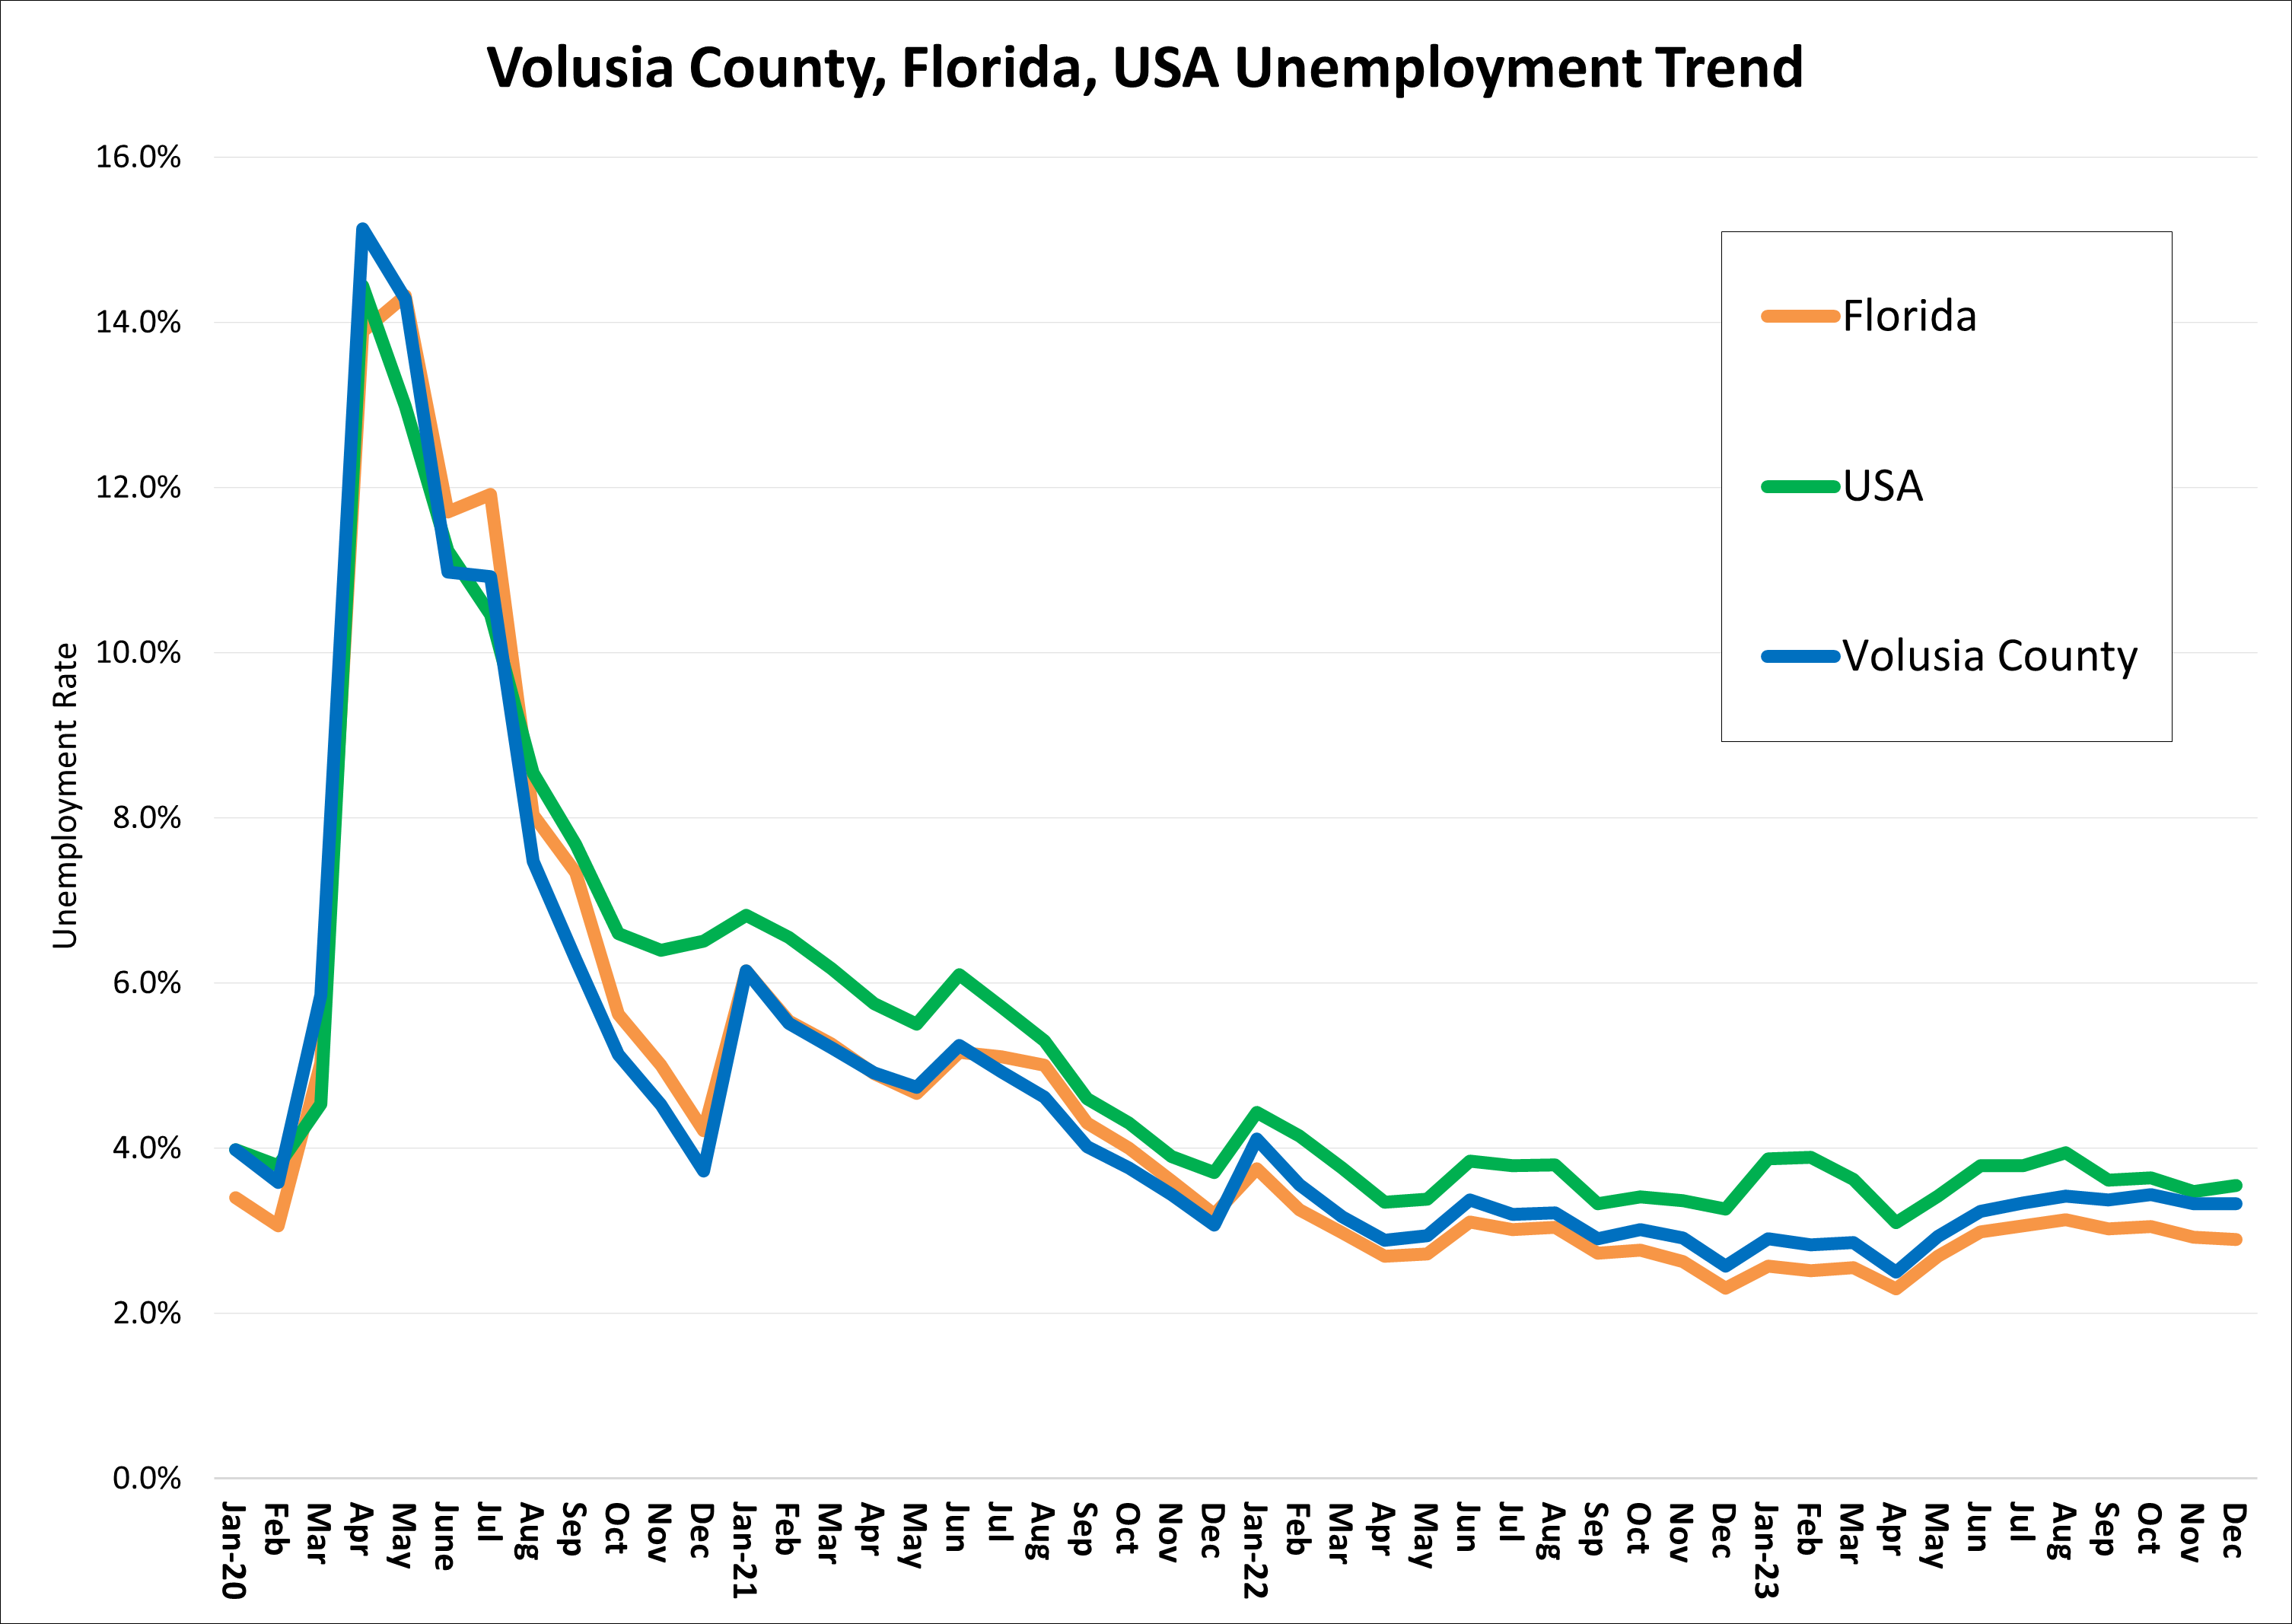 The chart shows the unemployment rate trend for Volusia County, Florida, and the US from January 2020 to present. After the impact of COVID and a rate of 15.1%, Volusia County's unemployment rate has steadily decreased and is currently at 3.3% as of Dec. 2023. Florida's unemployment rate is 2.9% and the US is 3.5%.